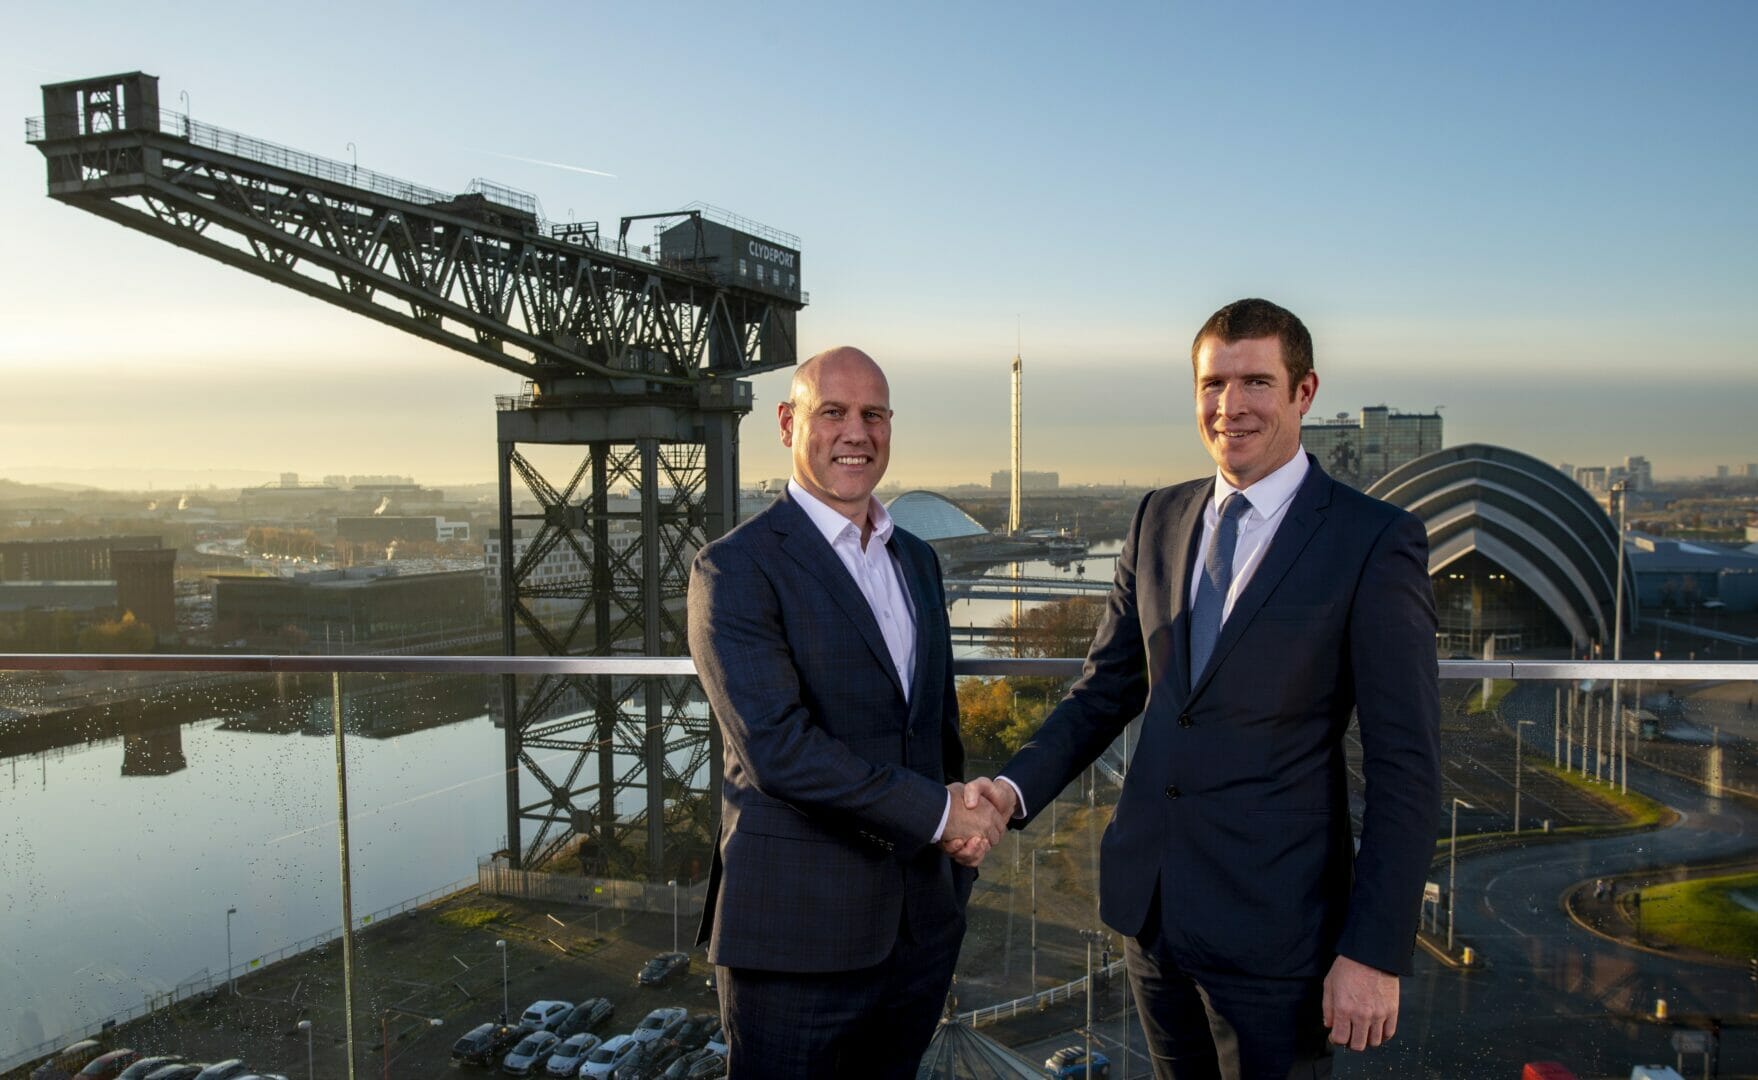 Hardies Property & Construction Consultants, one of Scotland’s largest independent firms of Chartered Surveyors, has acquired Glasgow-based Allan & Hanel Chartered Surveyors